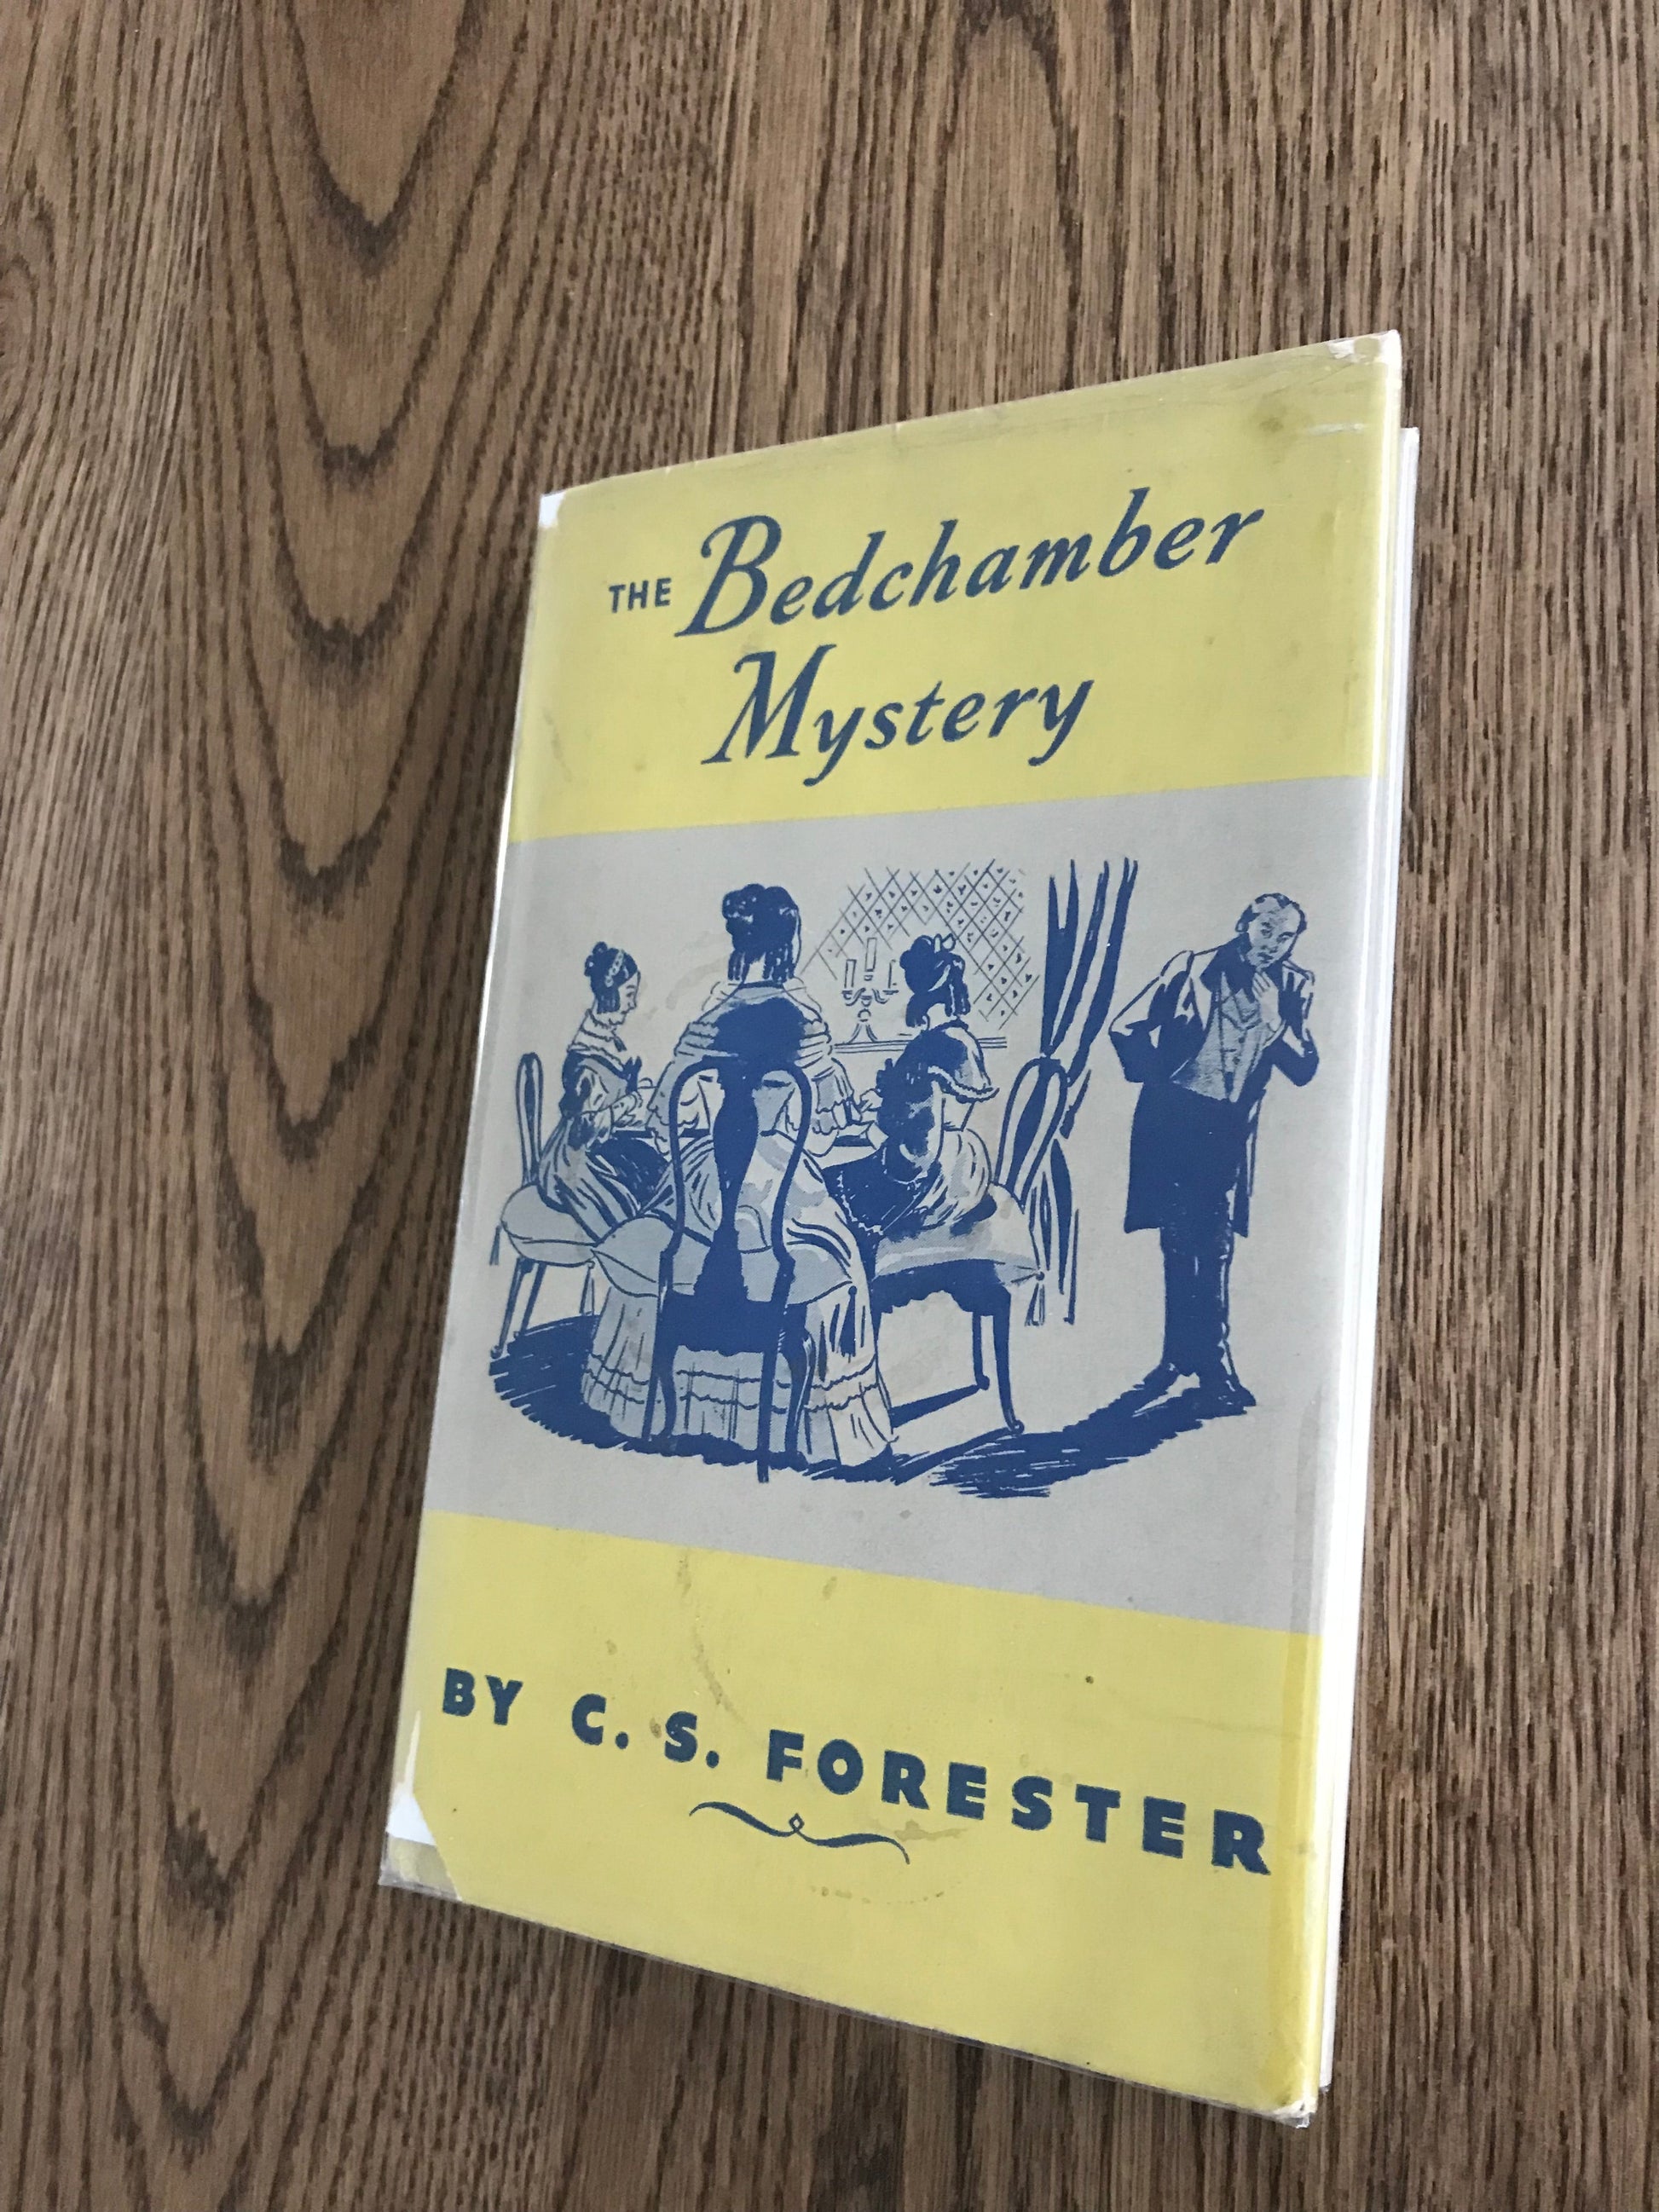 THE BEDCHAMBER MYSTERY   -   C.S. FORESTER BooksCardsNBikes